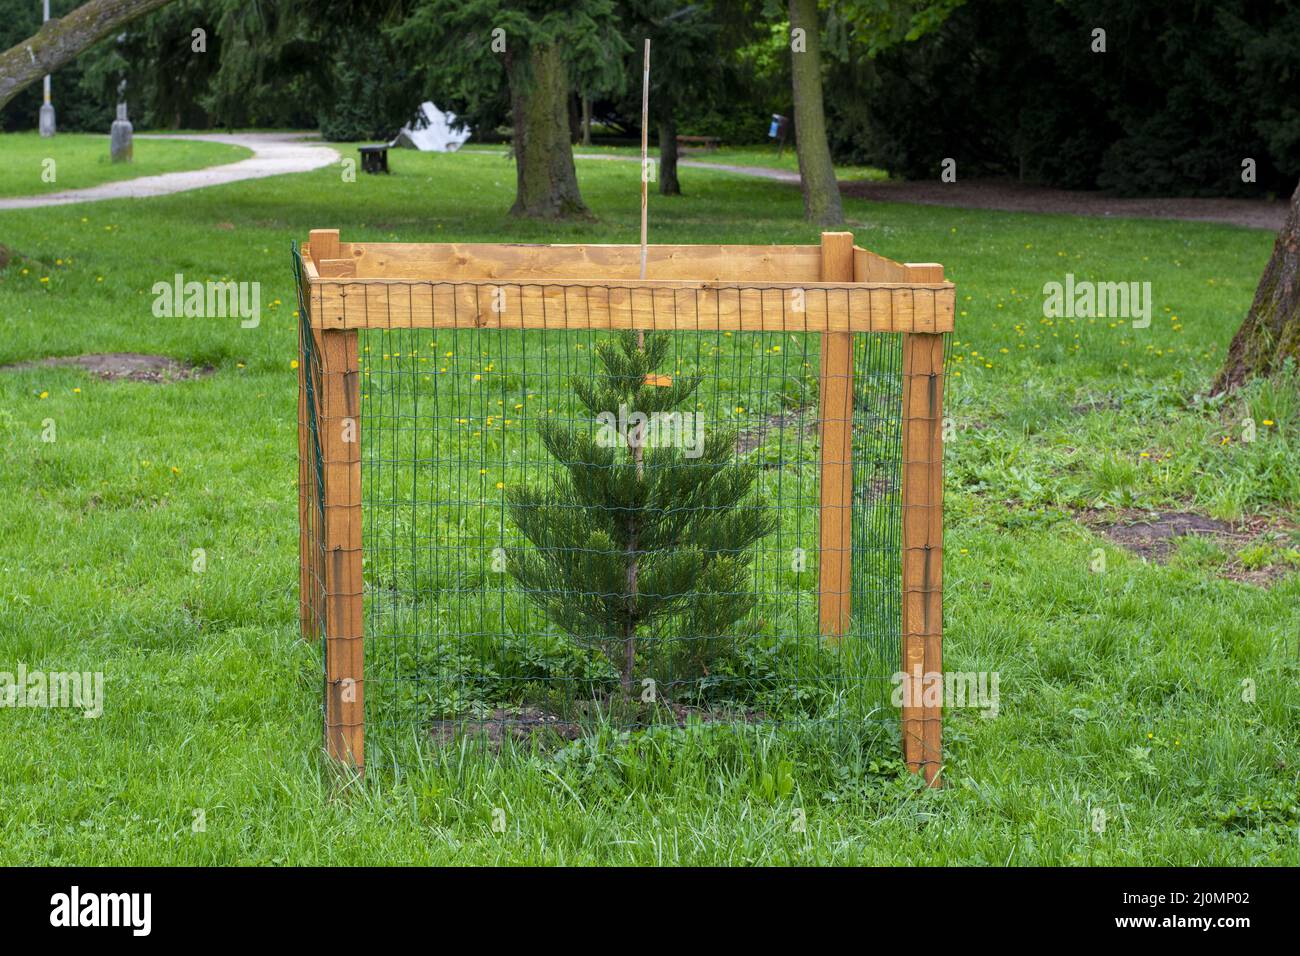 Mesh tree guard protecting young tree from wildlife damage. Fence protecting tree in the park. Stock Photo